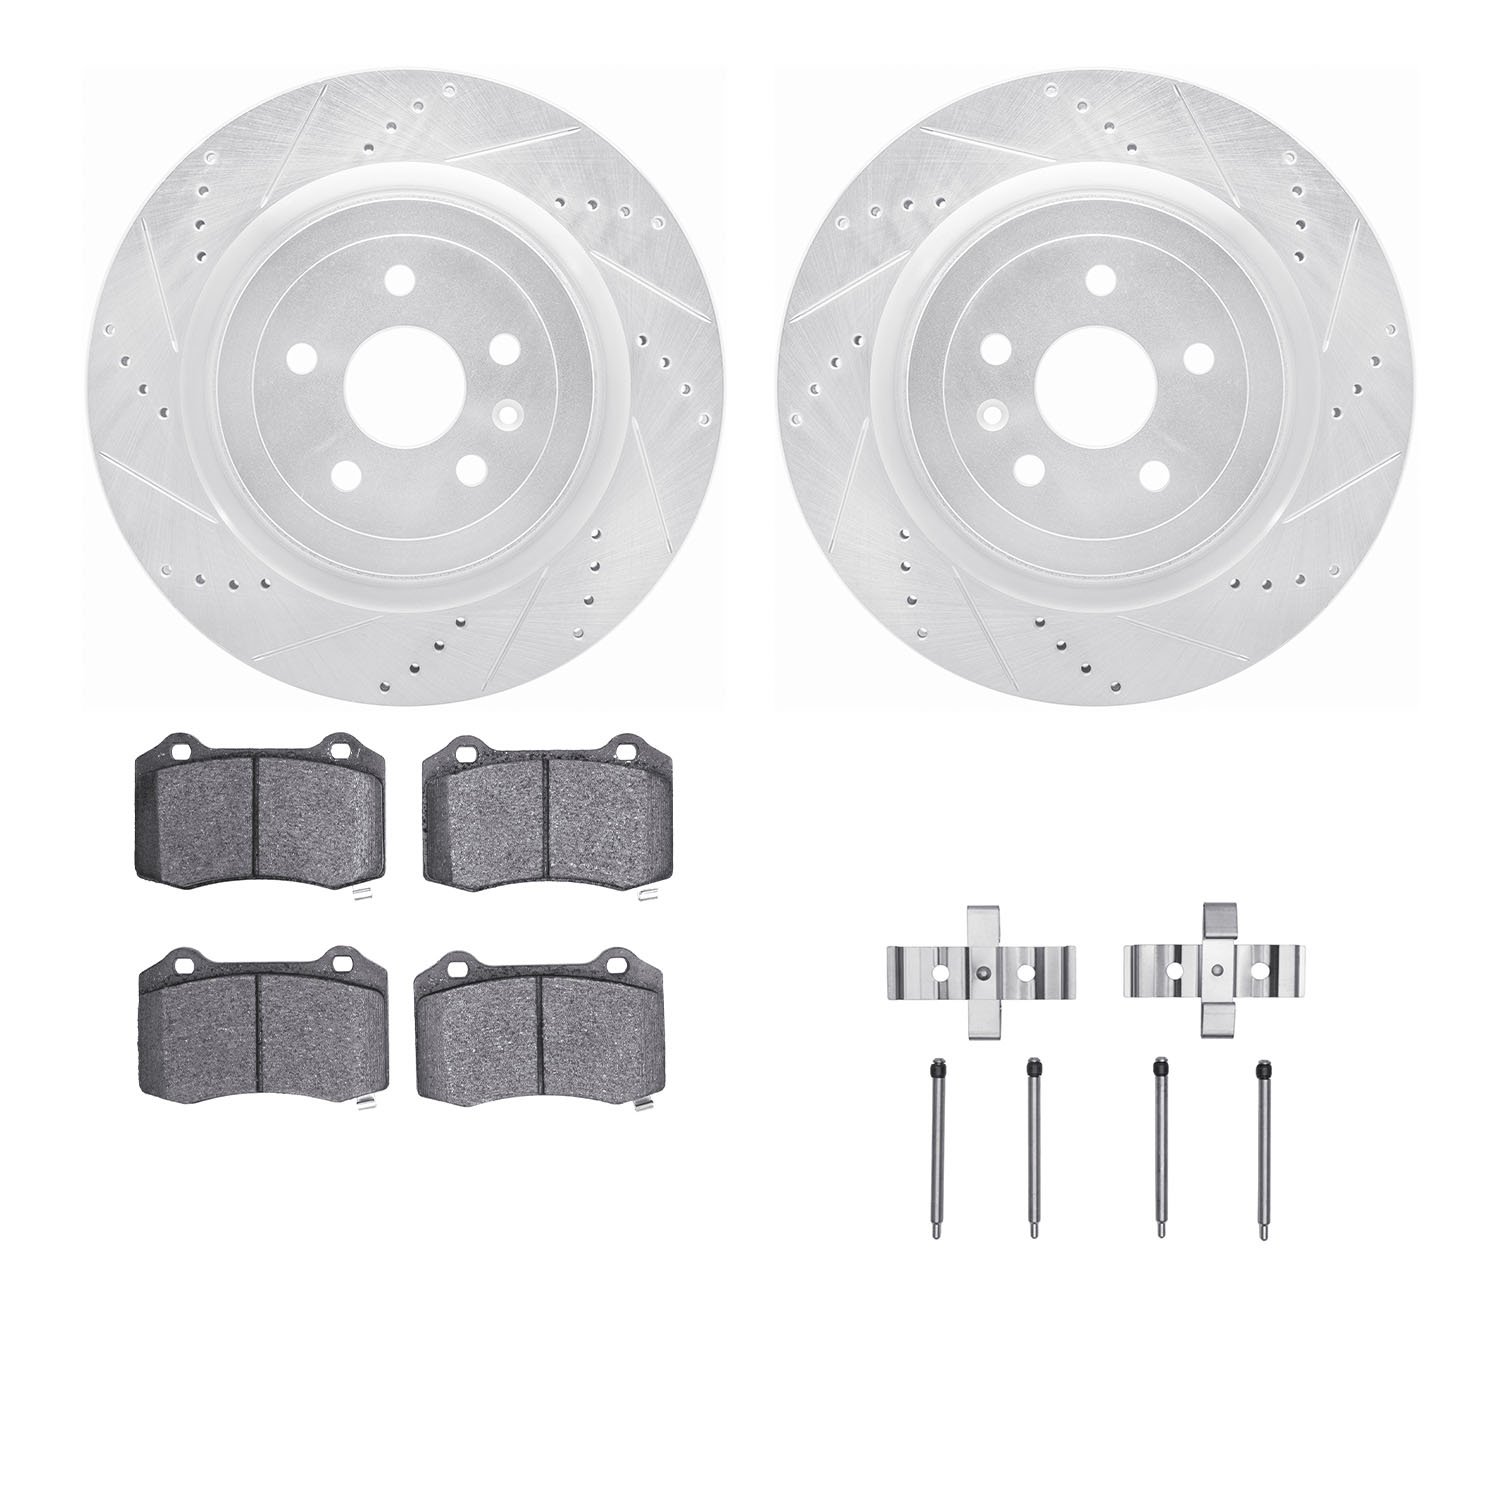 7312-47054 Drilled/Slotted Brake Rotor with 3000-Series Ceramic Brake Pads Kit & Hardware [Silver], Fits Select GM, Position: Re